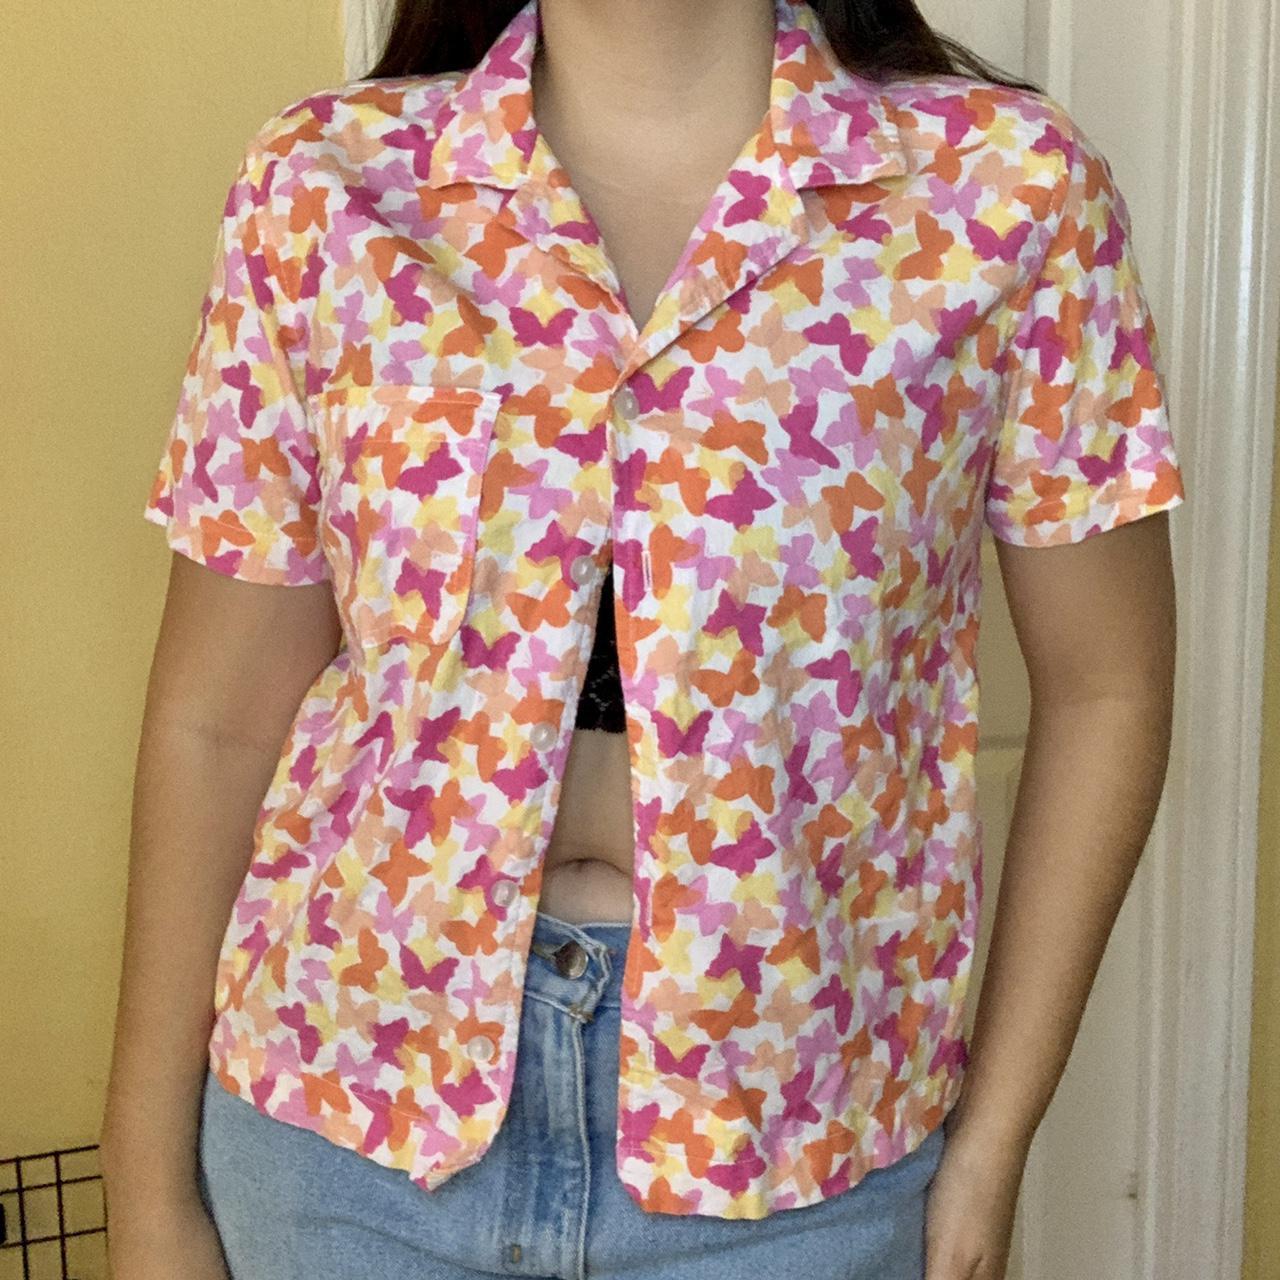 Product Image 1 - Funky Butterfly Multicolor Button Down
Size